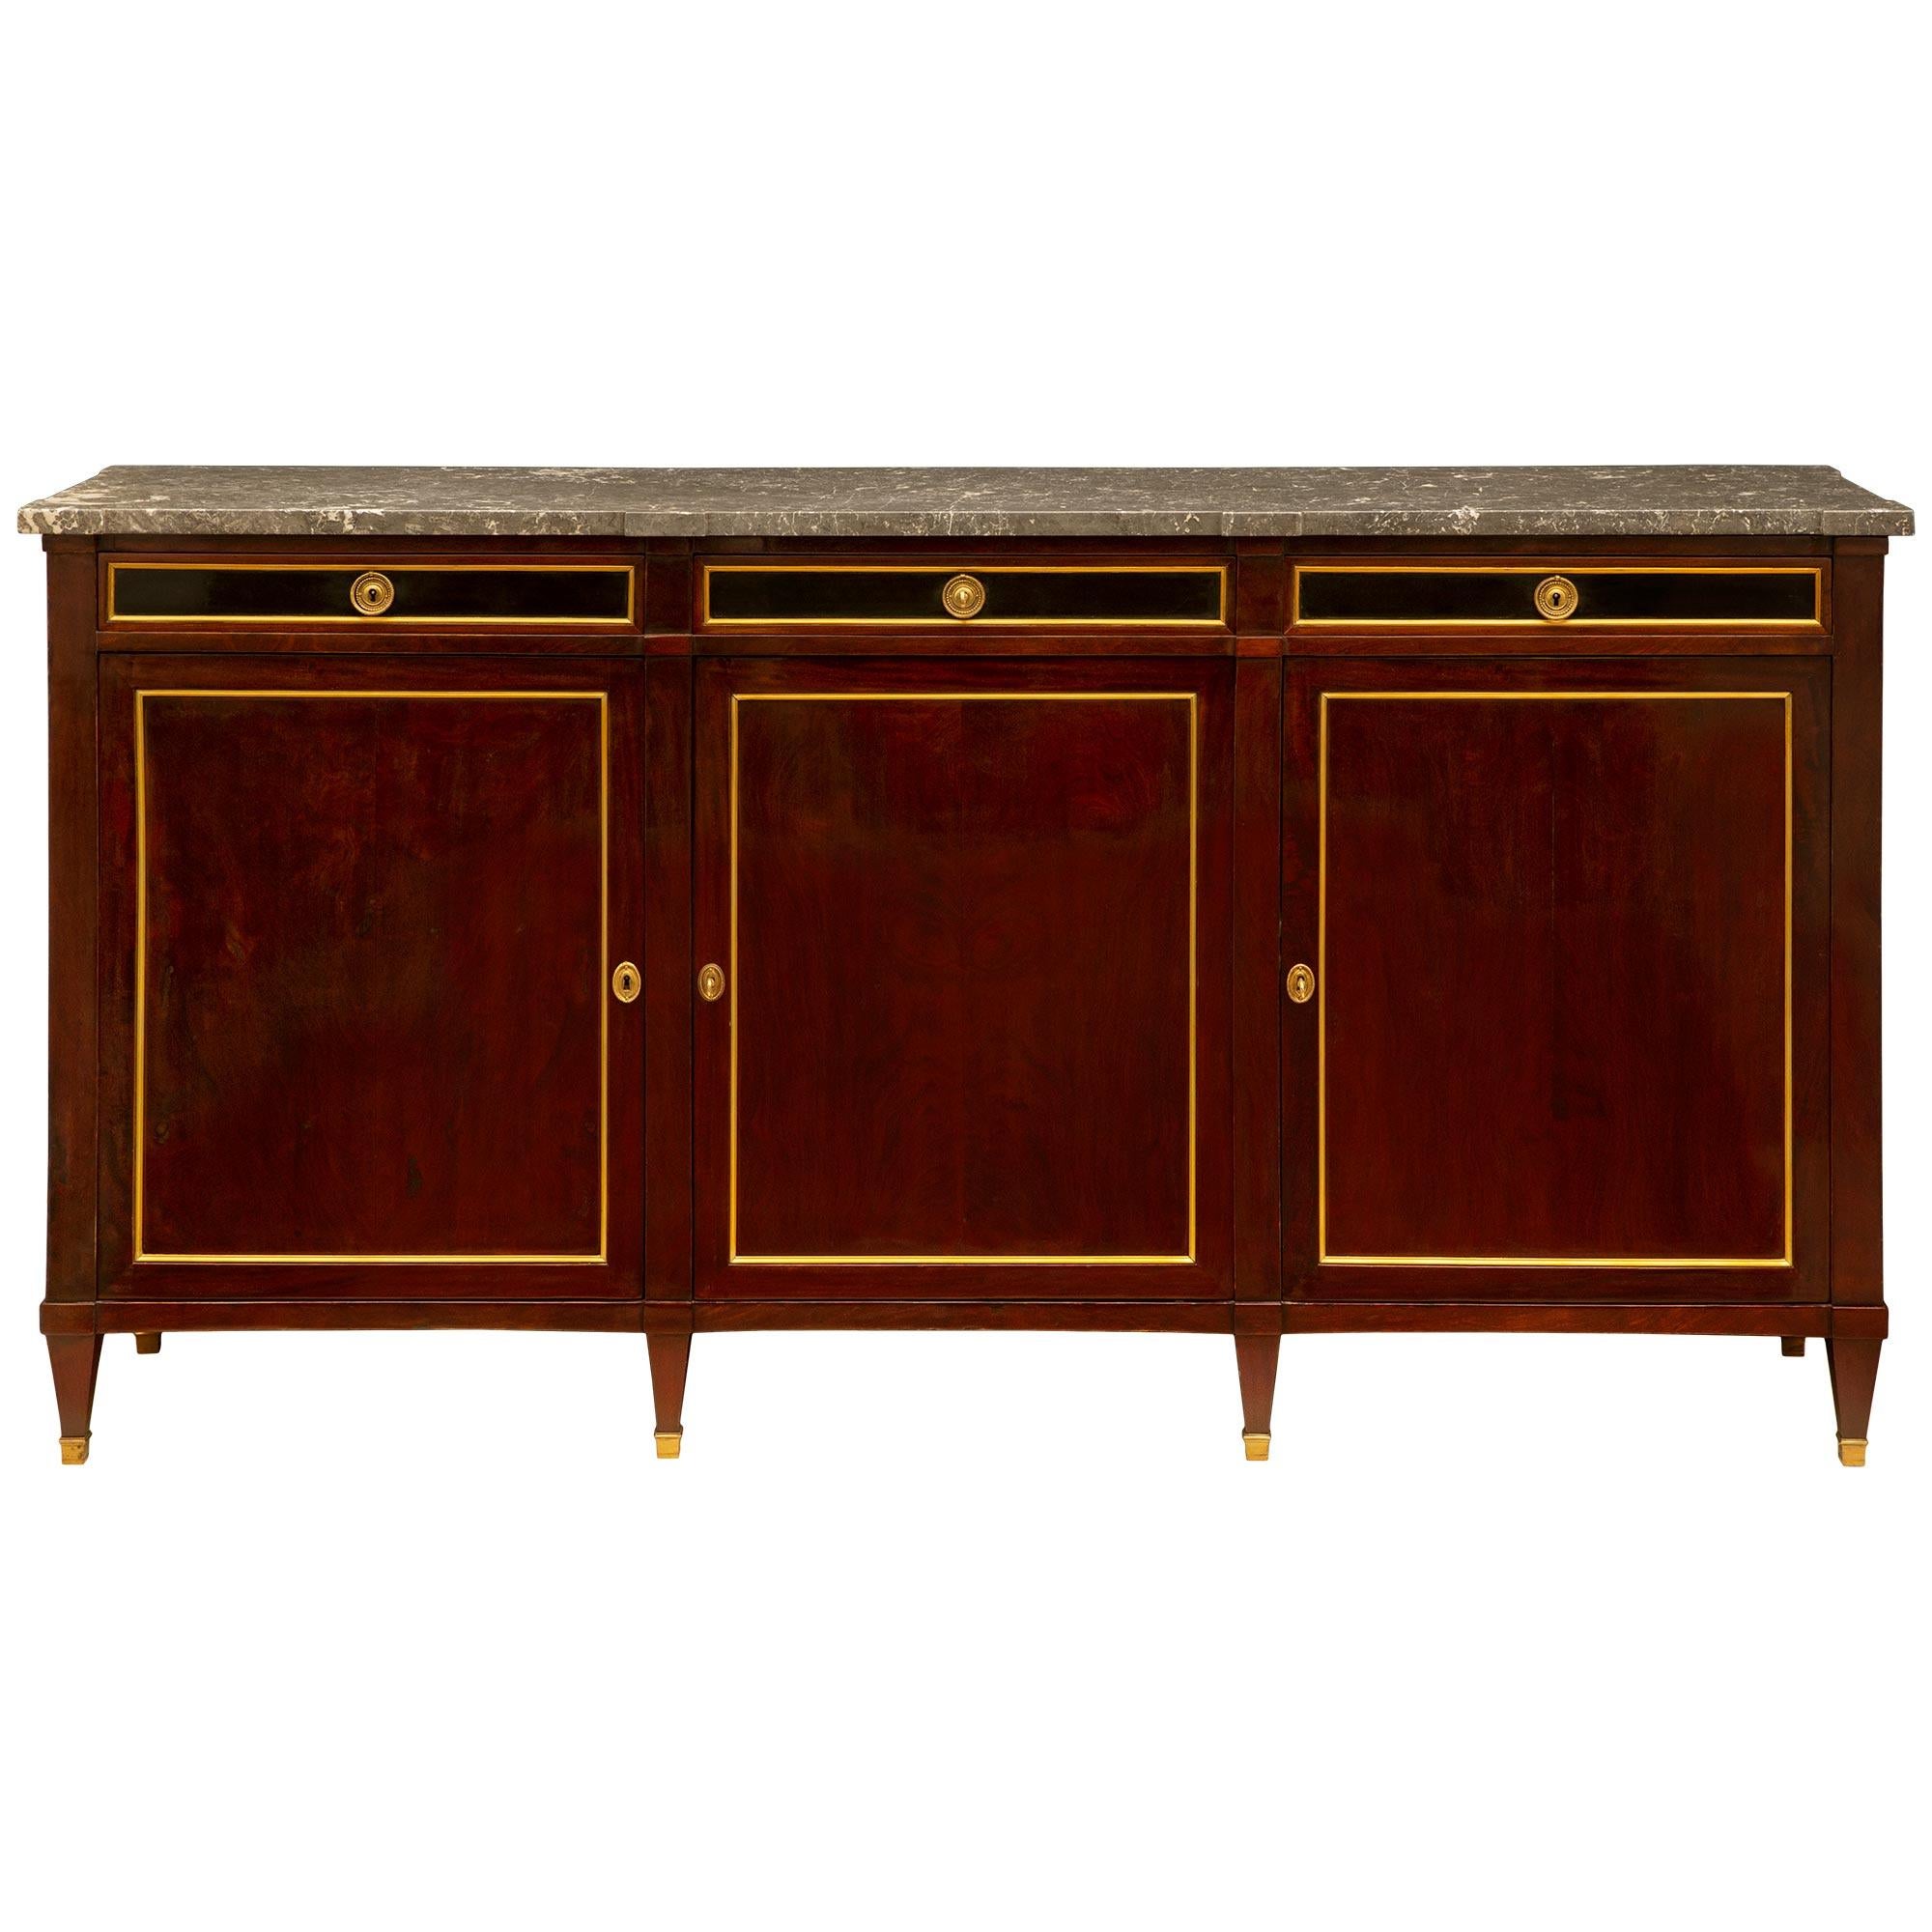 French 19th Century Louis XVI Style Mahogany, Ebony and Brass Filets Buffet For Sale 6